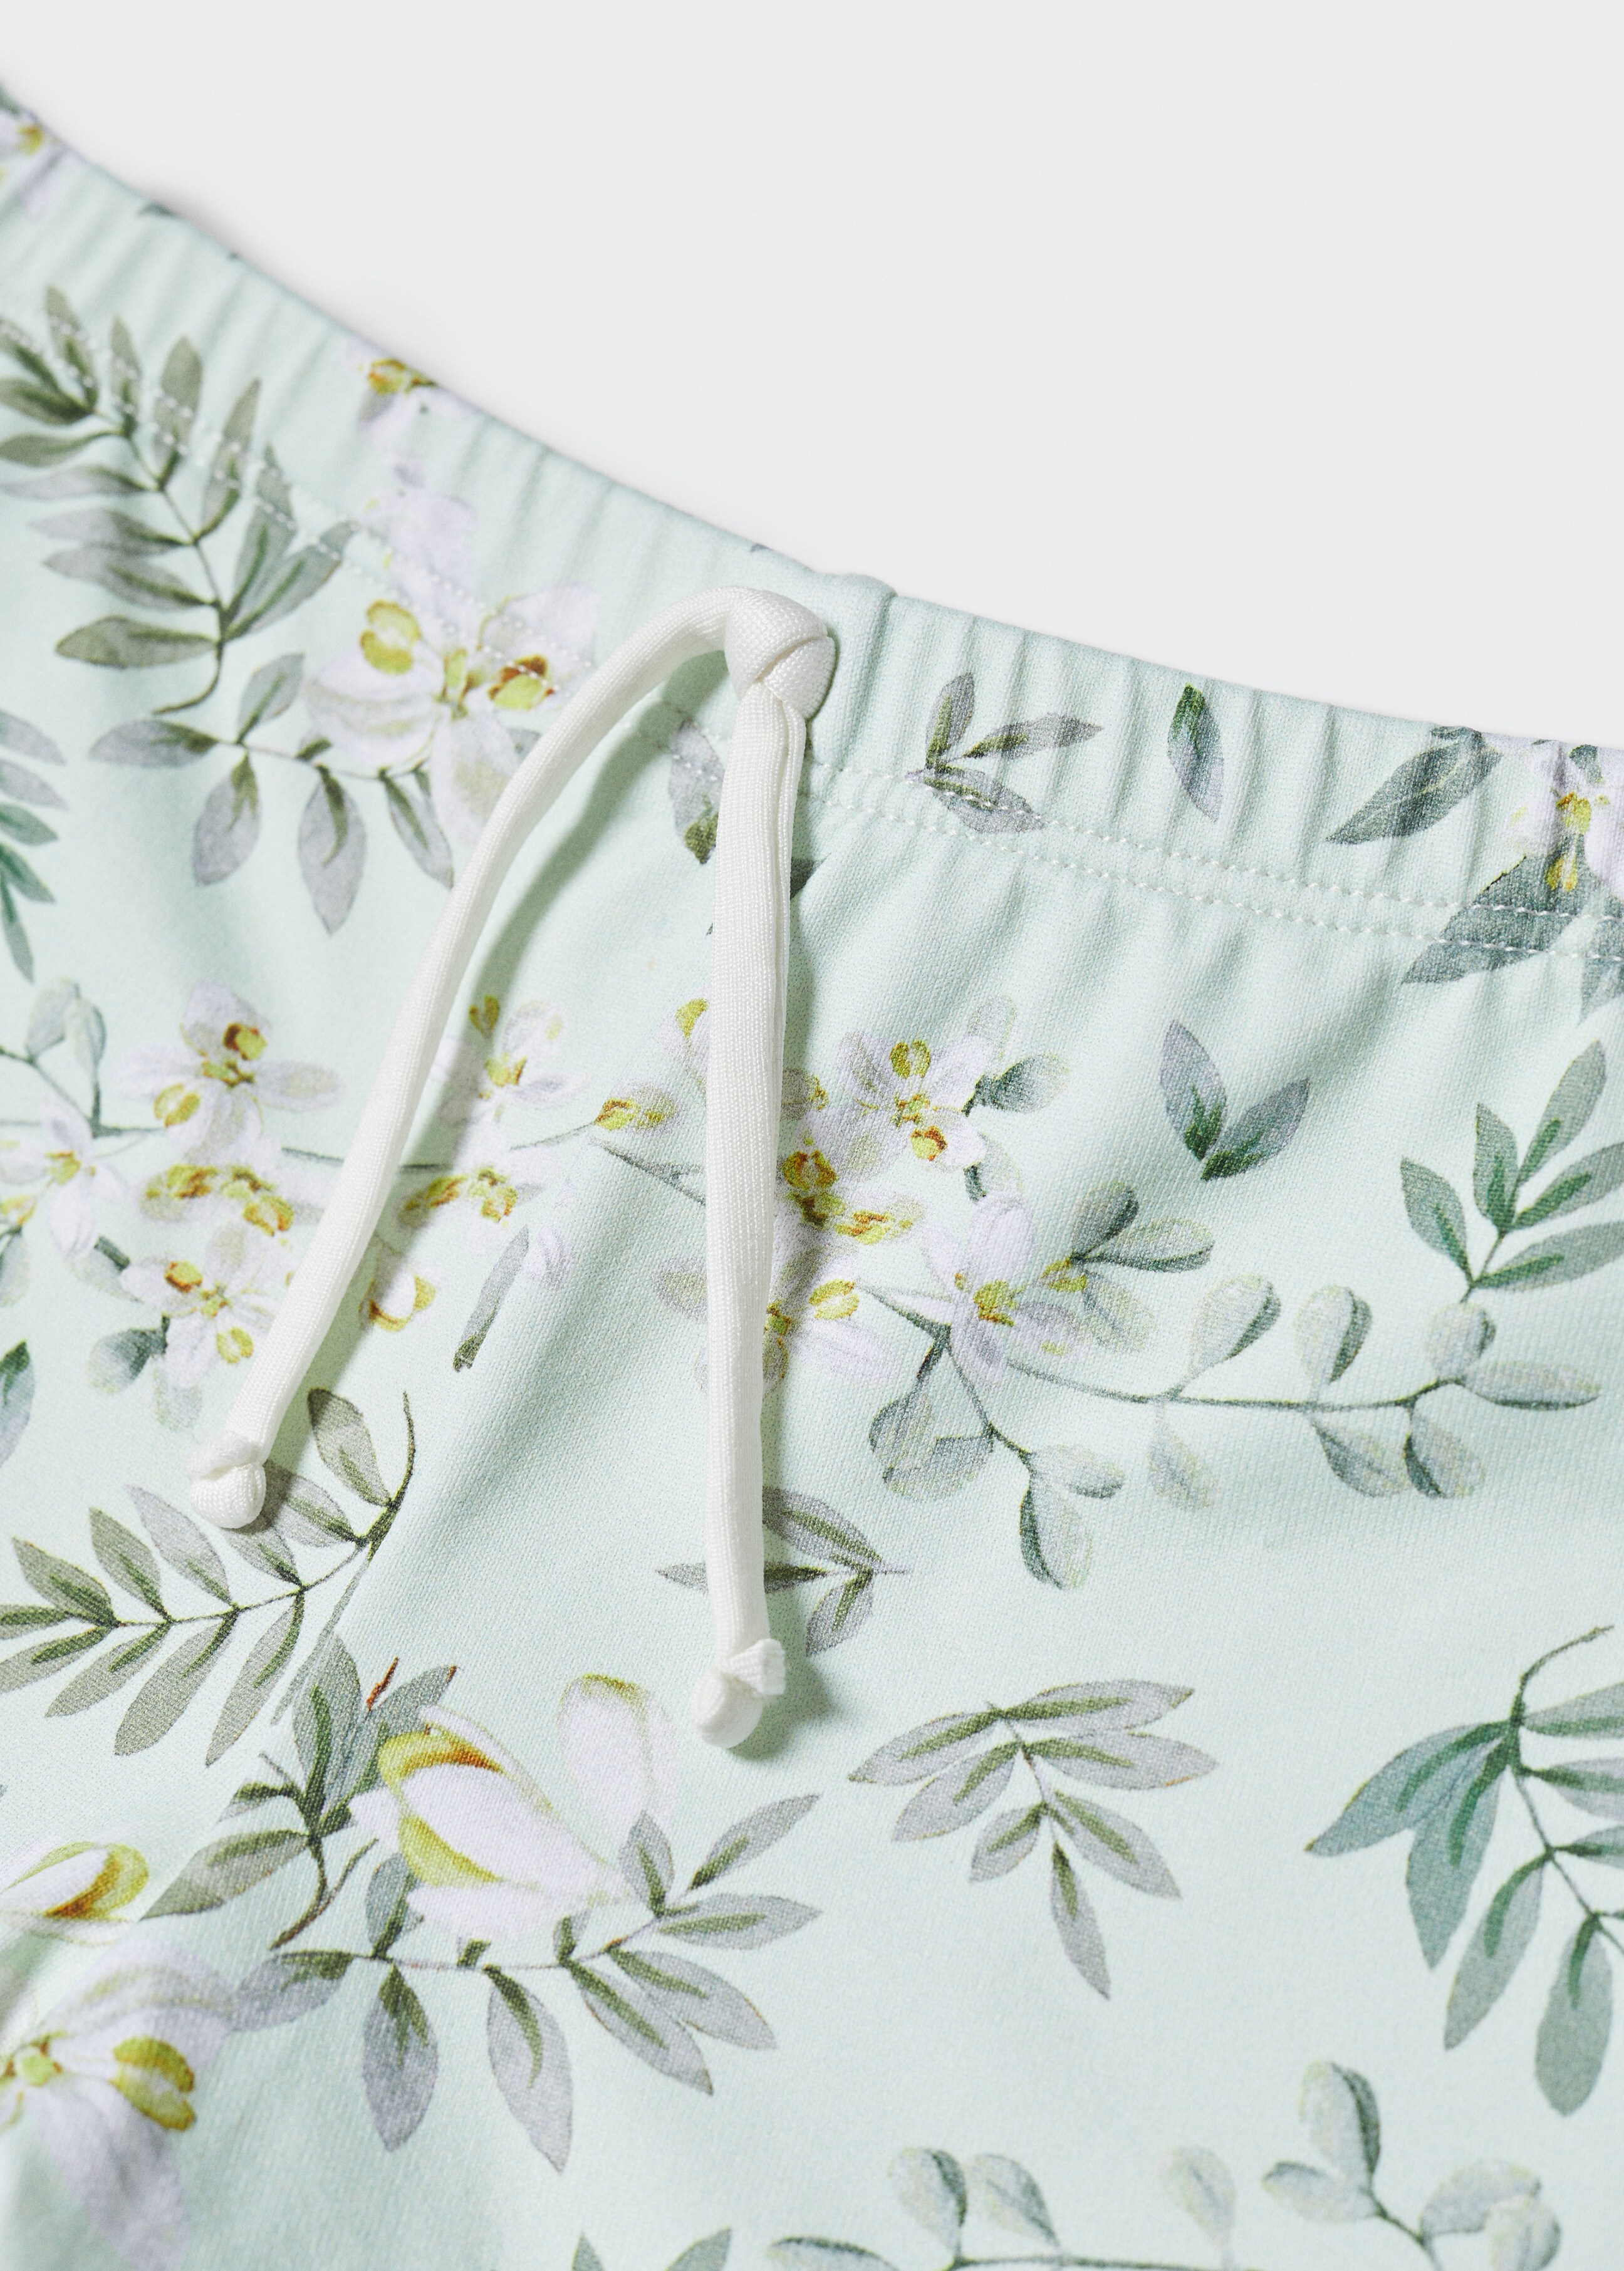 Printed swimsuit - Details of the article 8